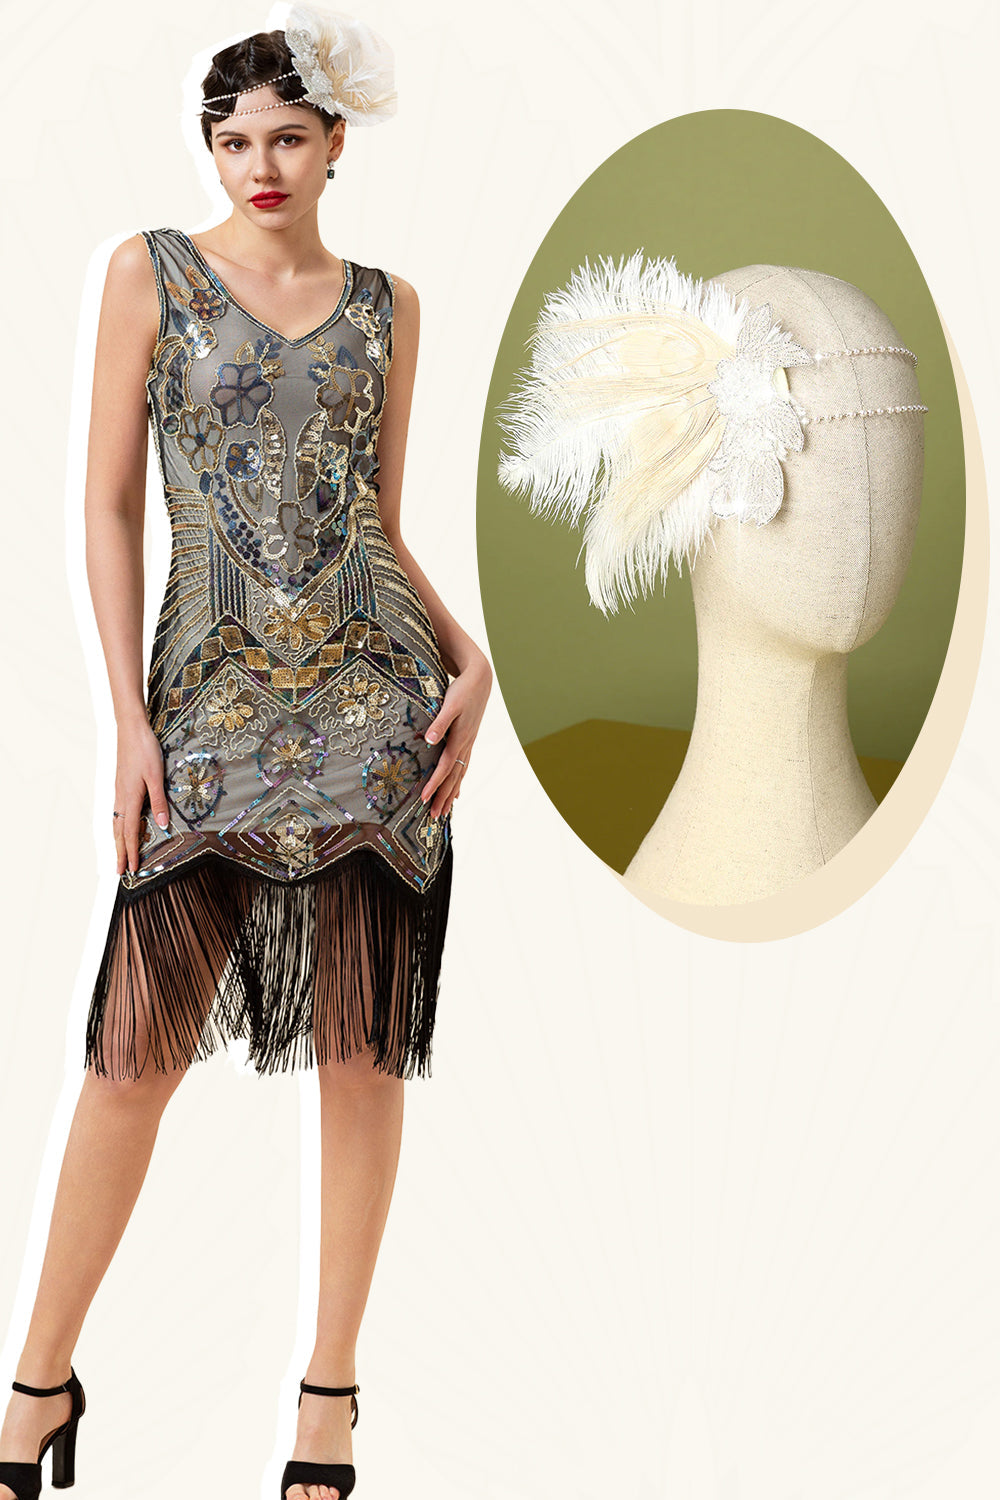 Apricot and Golden Sequined Fringes 1920s Gatsby Flapper Dress with 20s Accessories Set